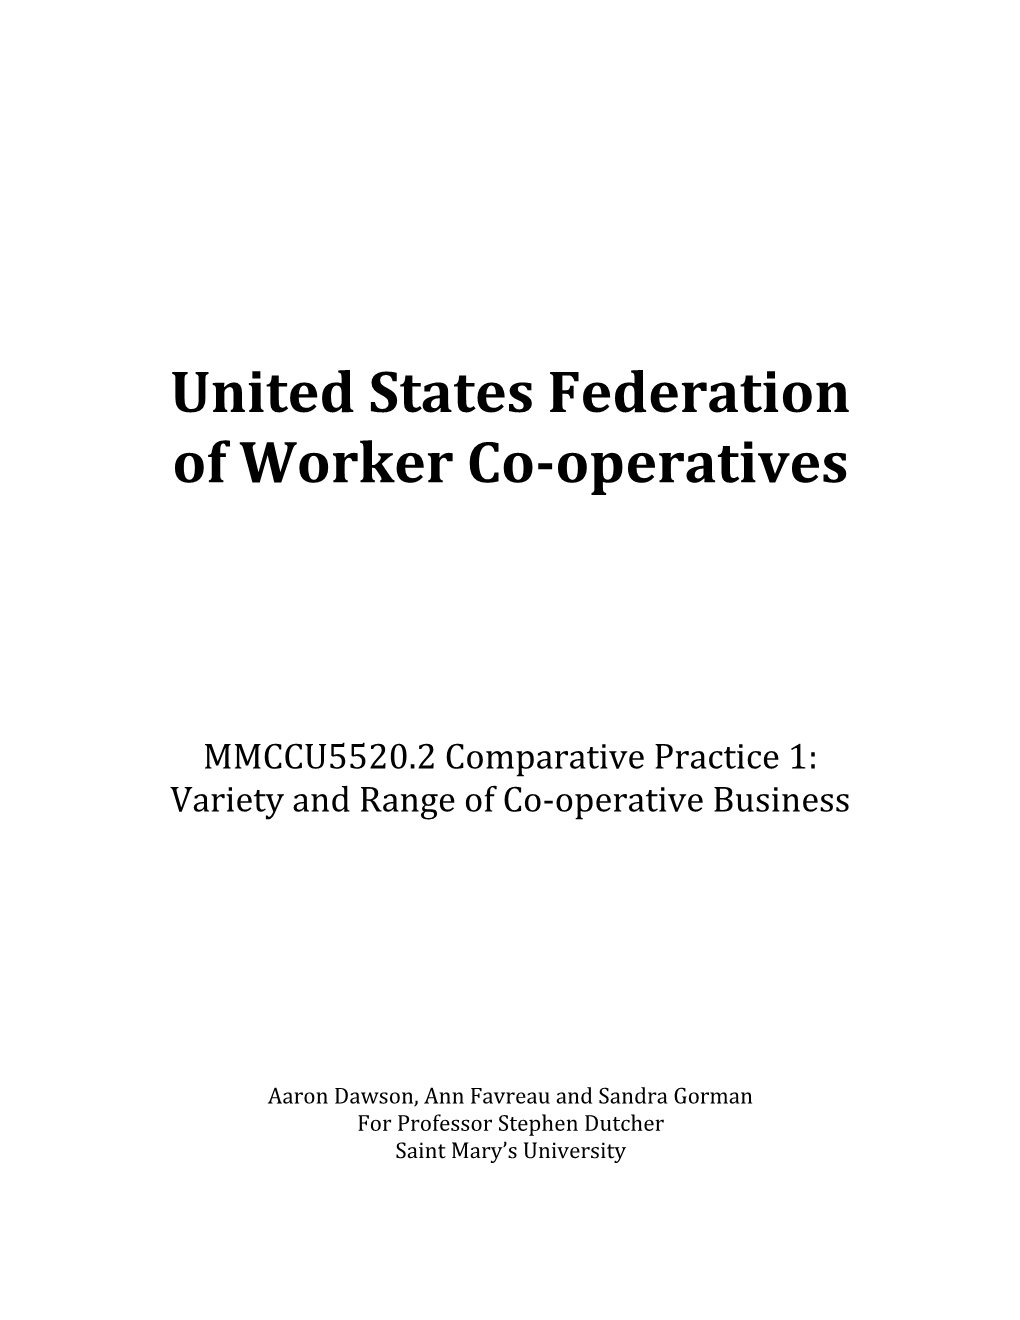 United States Federation of Worker Co-Operatives